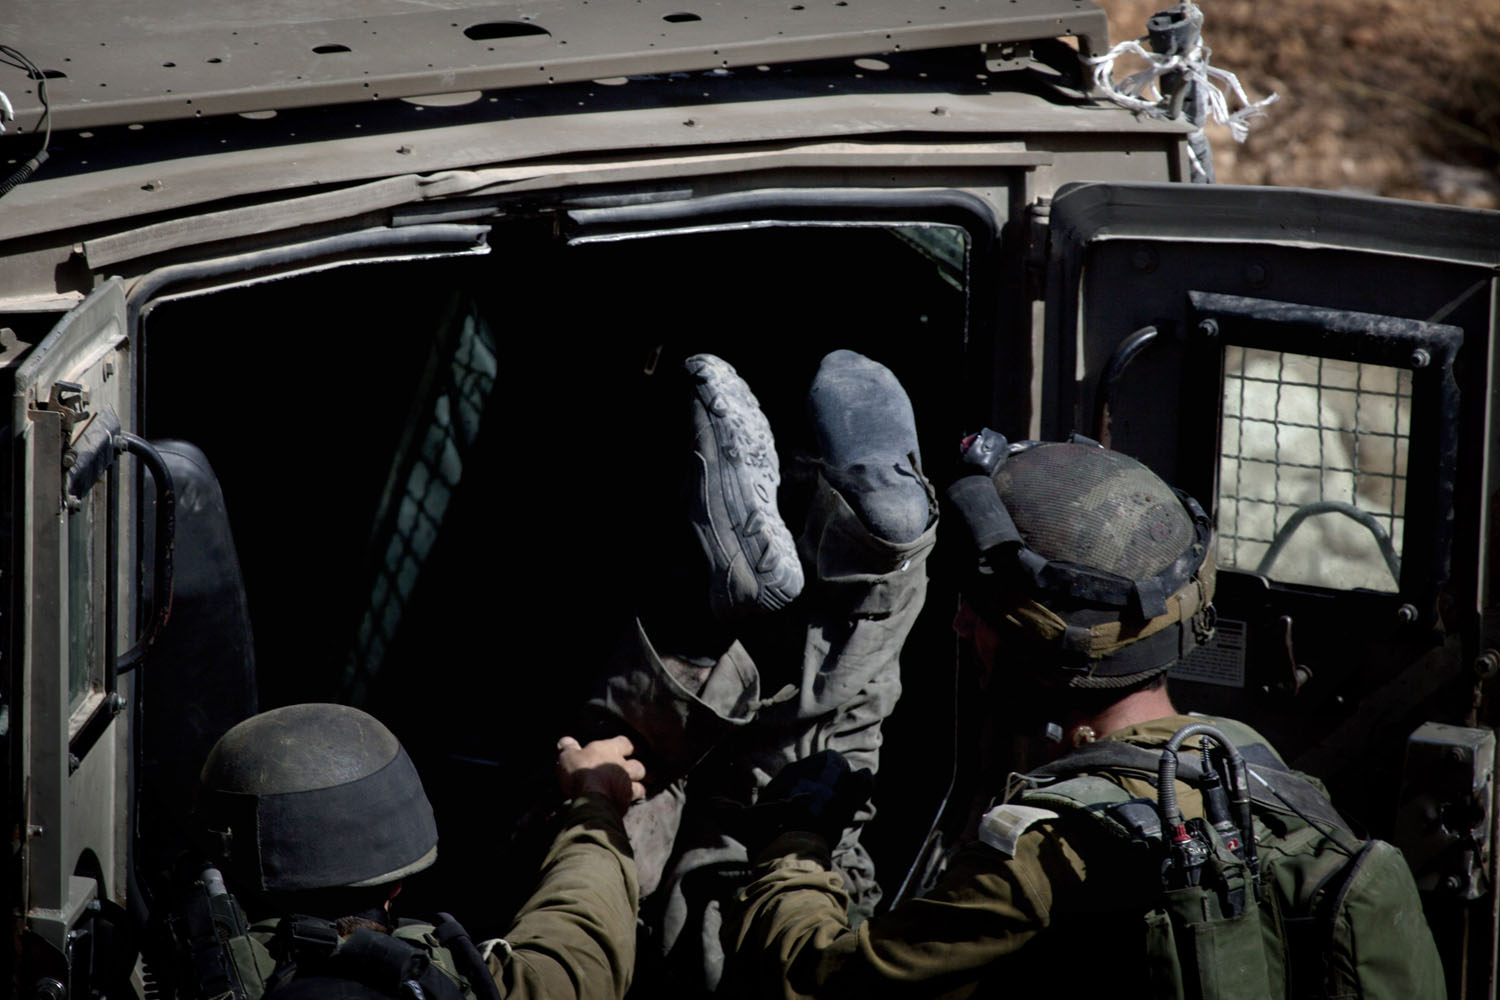 Oct. 22, 2013. Israeli soldiers load the body of slain Palestinian Islamic Jihad militant Mohamed Aatzi into an army vehicle in the village of Bilin near the West Bank city of Ramallah.